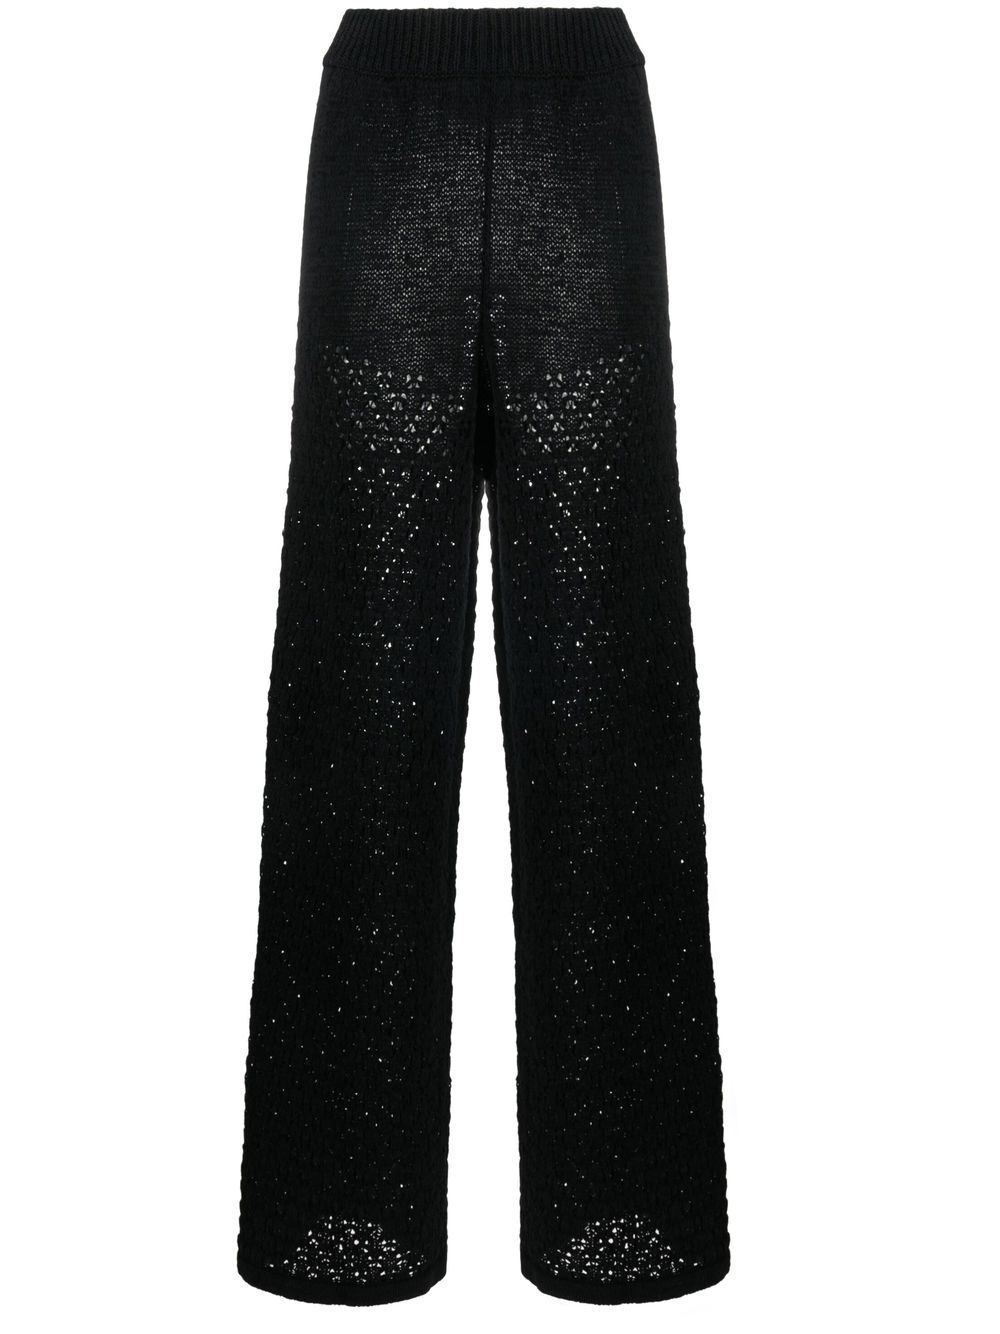 ROTATE loose-knit high-waisted Trousers - Farfetch